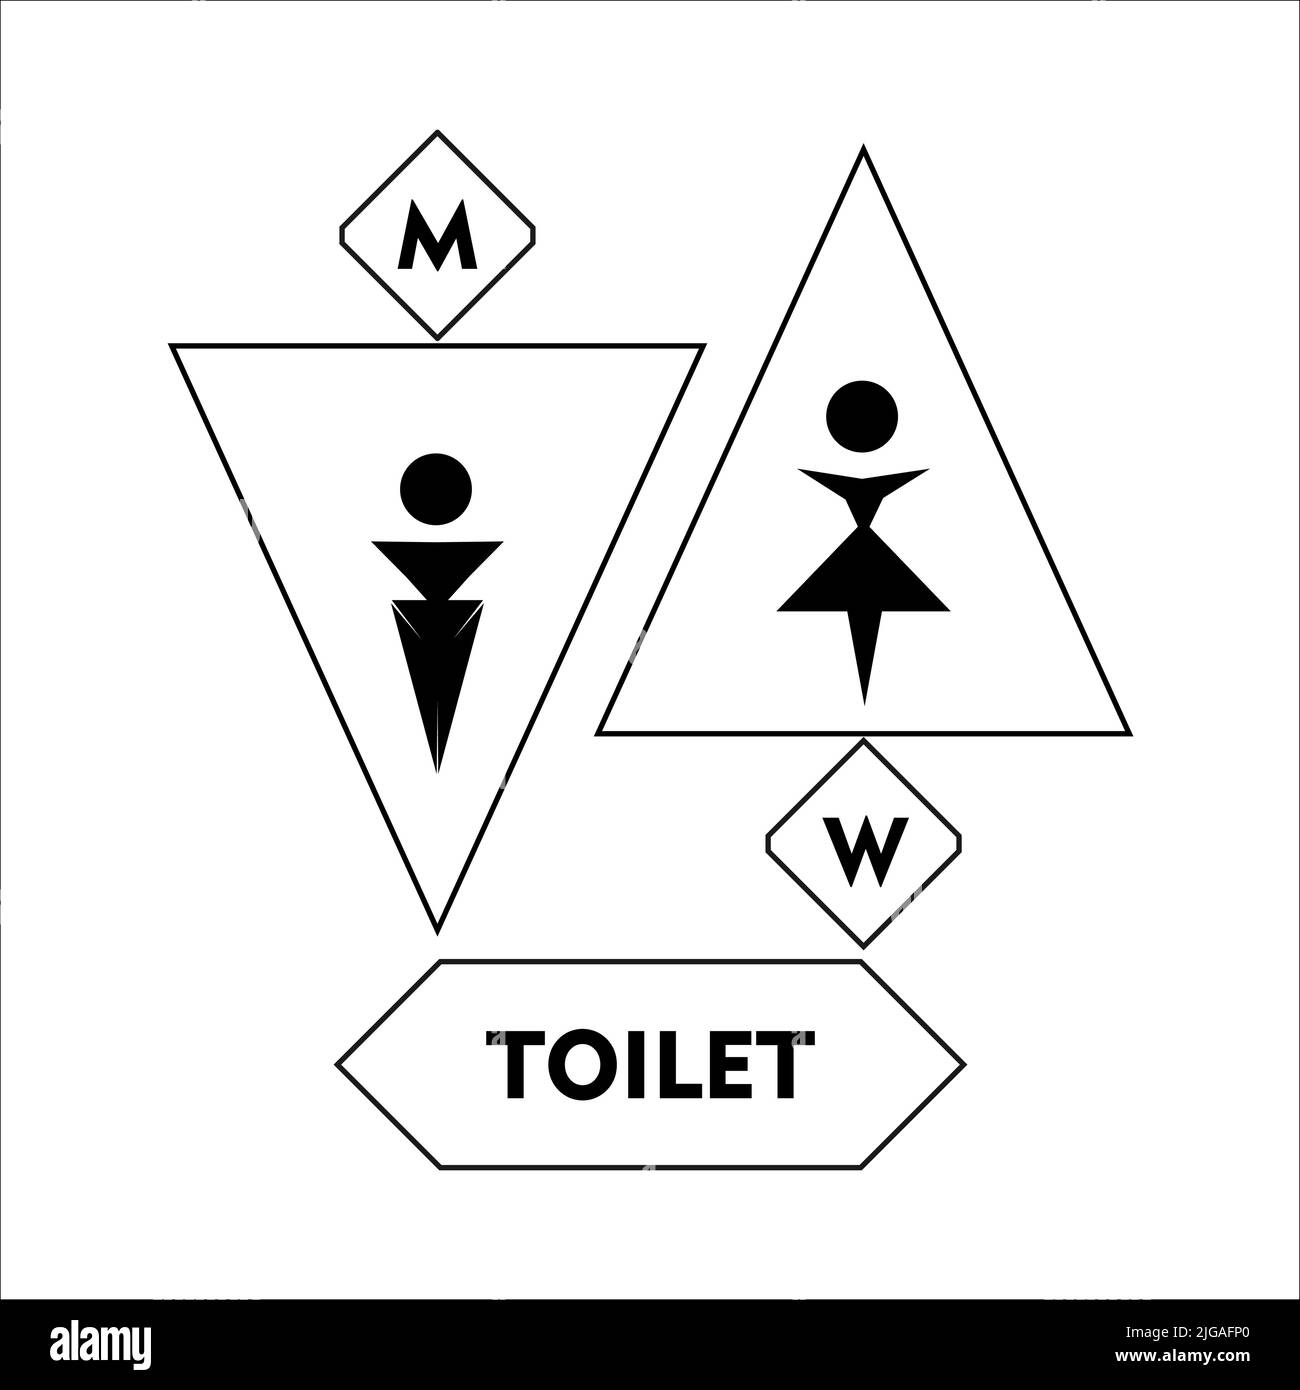 Vector men and women restroom sign set. Black silhouettes of people. Vector toilet icons Stock Vector